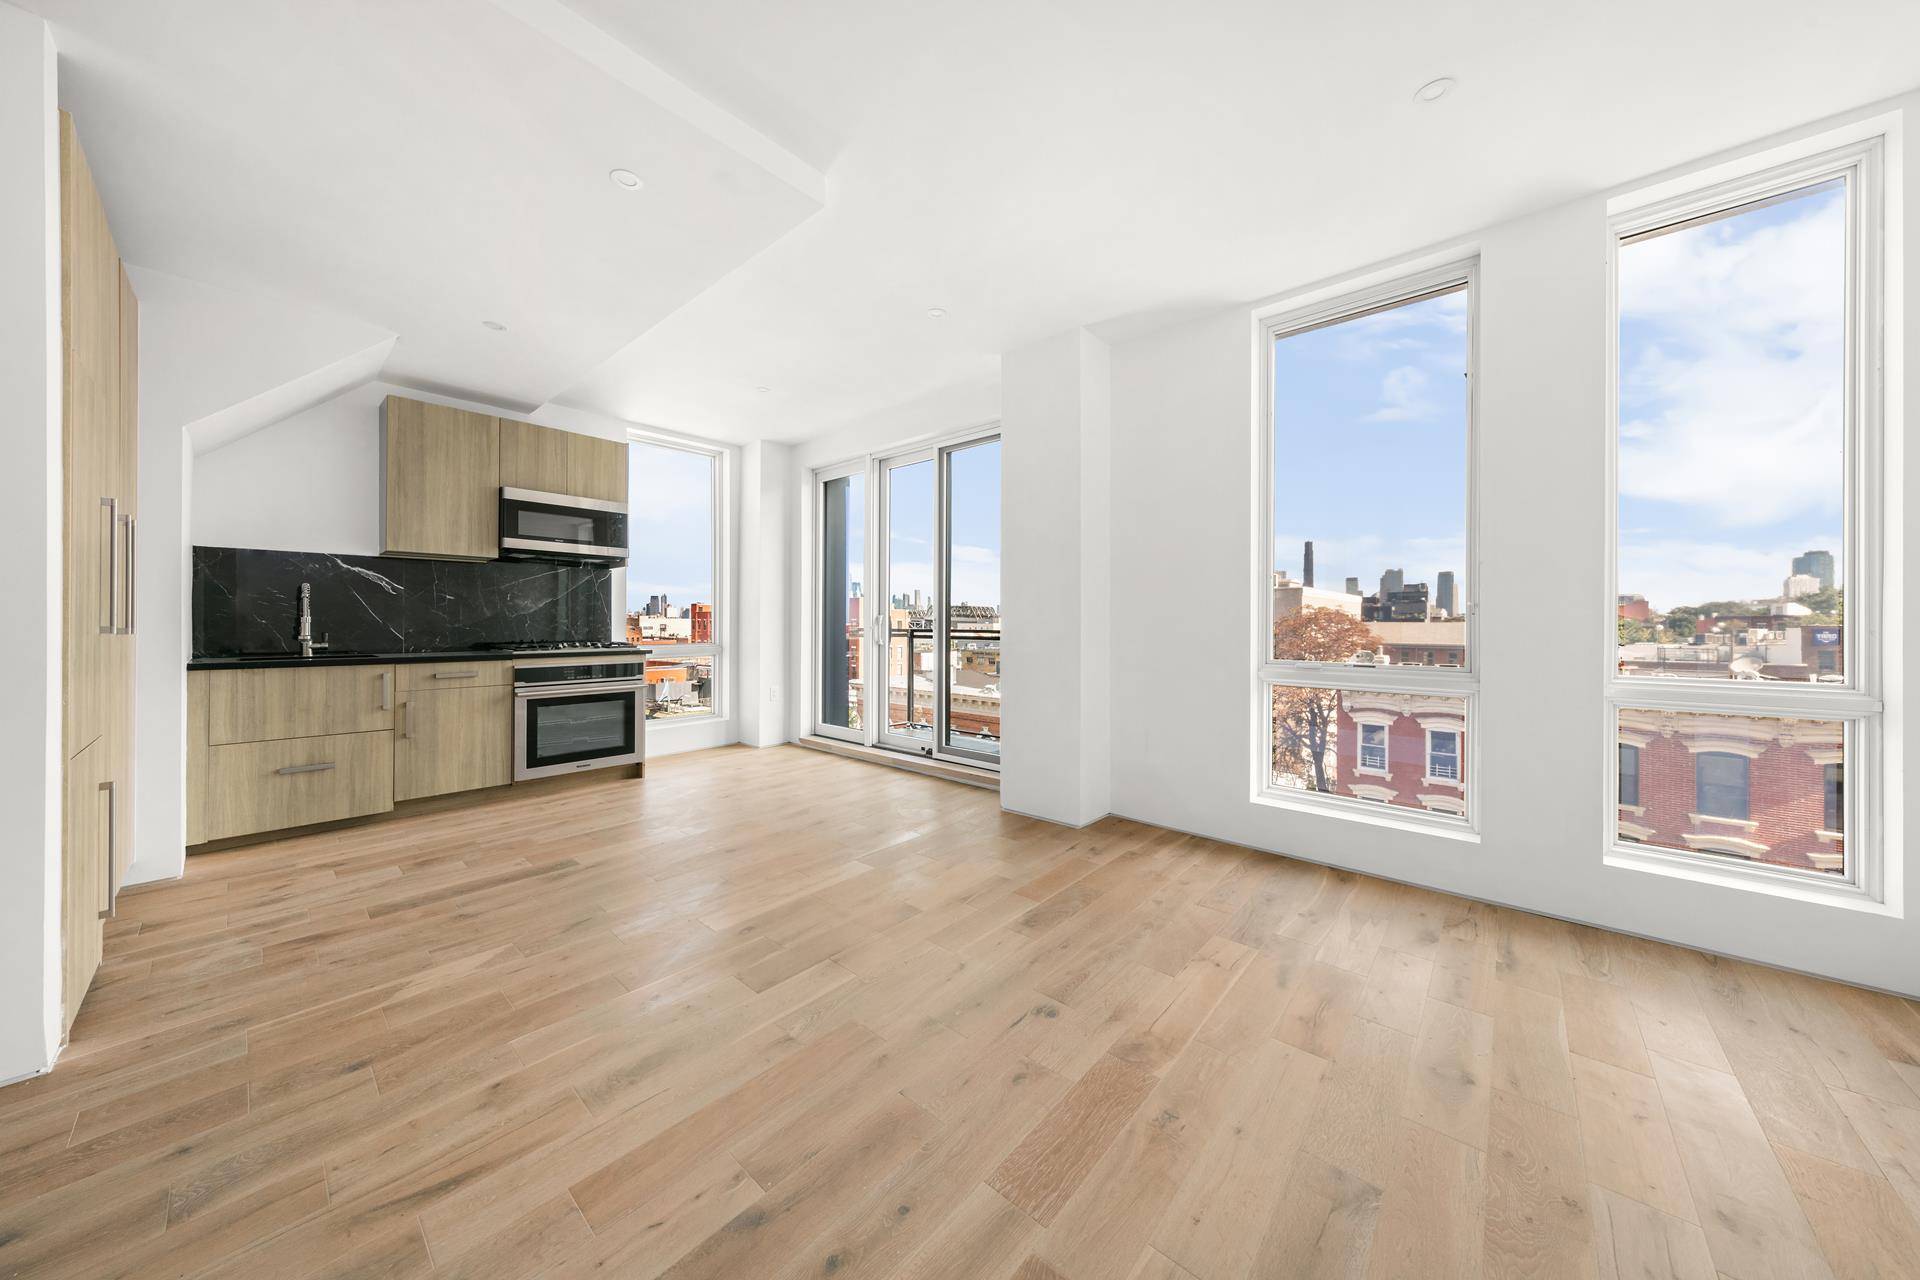 Introducing Penthouse A at 136 14th Street A spectacular 1 bed 2 bath penthouse with a private roof deck and balcony at the Genesis, a boutique new development at the ...